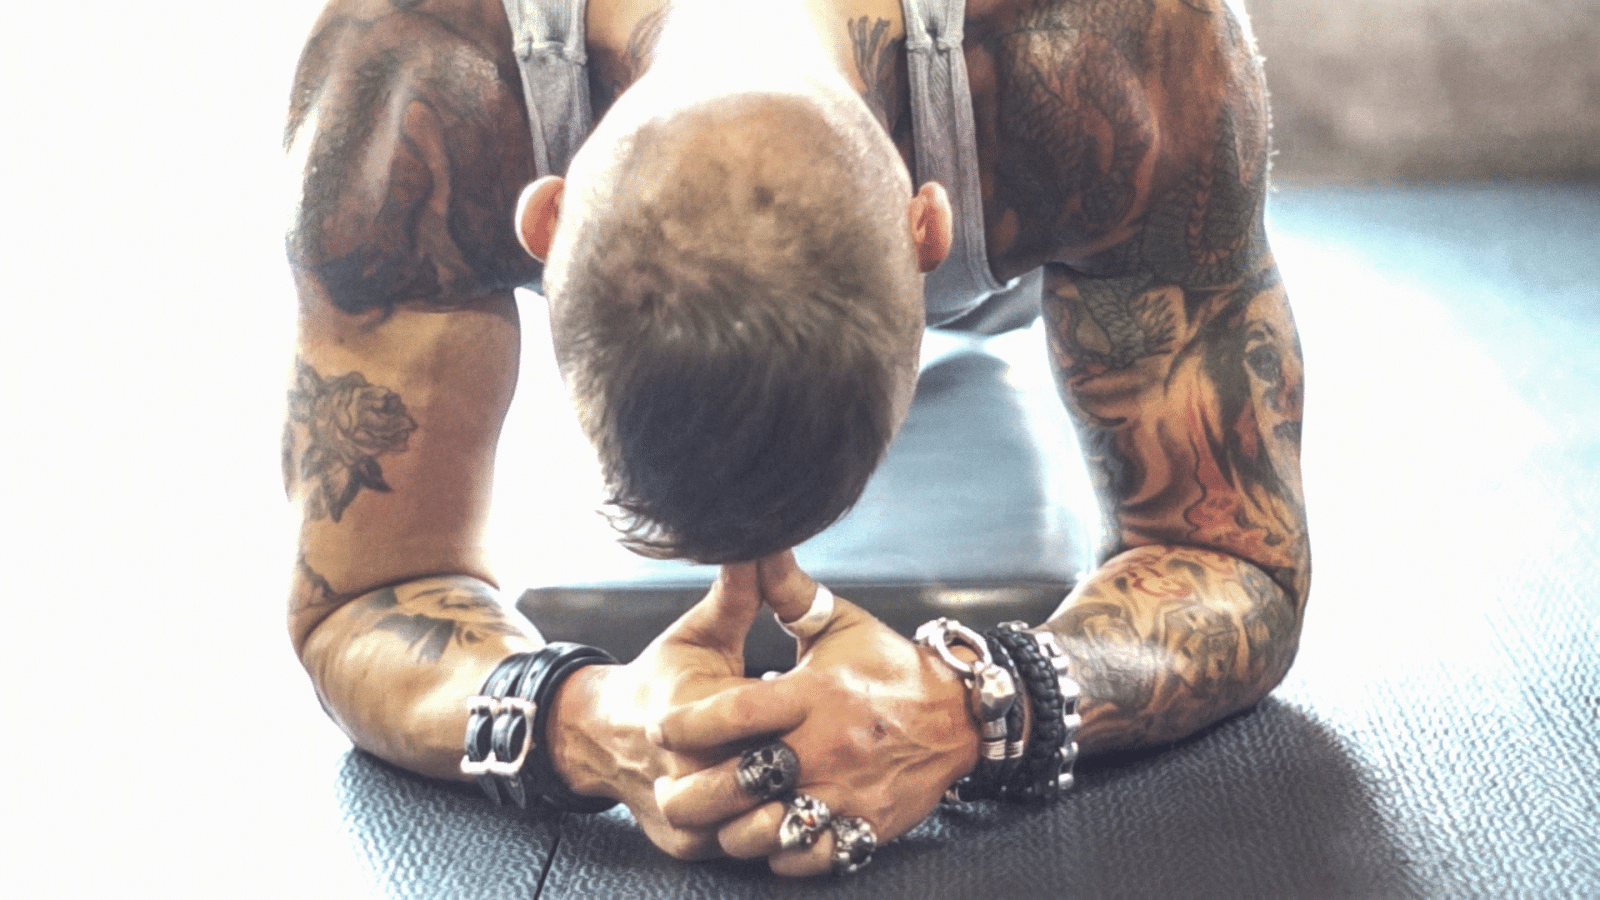 man with lots of tattoos bowing in prayer